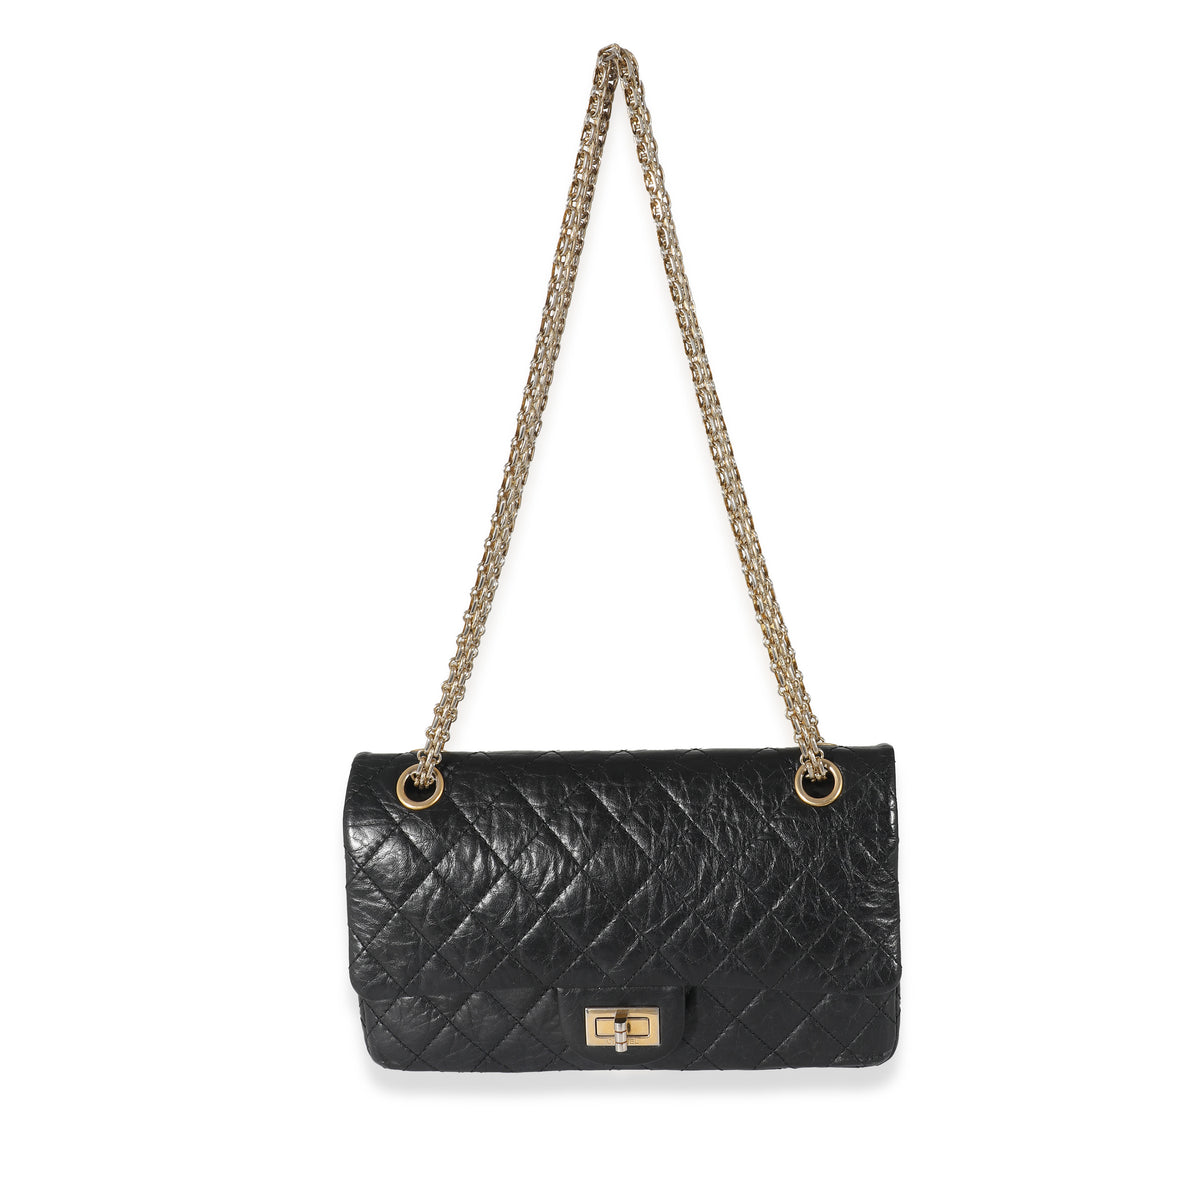 Chanel Black Aged Calfskin Quilted 2.55 Reissue 225 Flap Bag